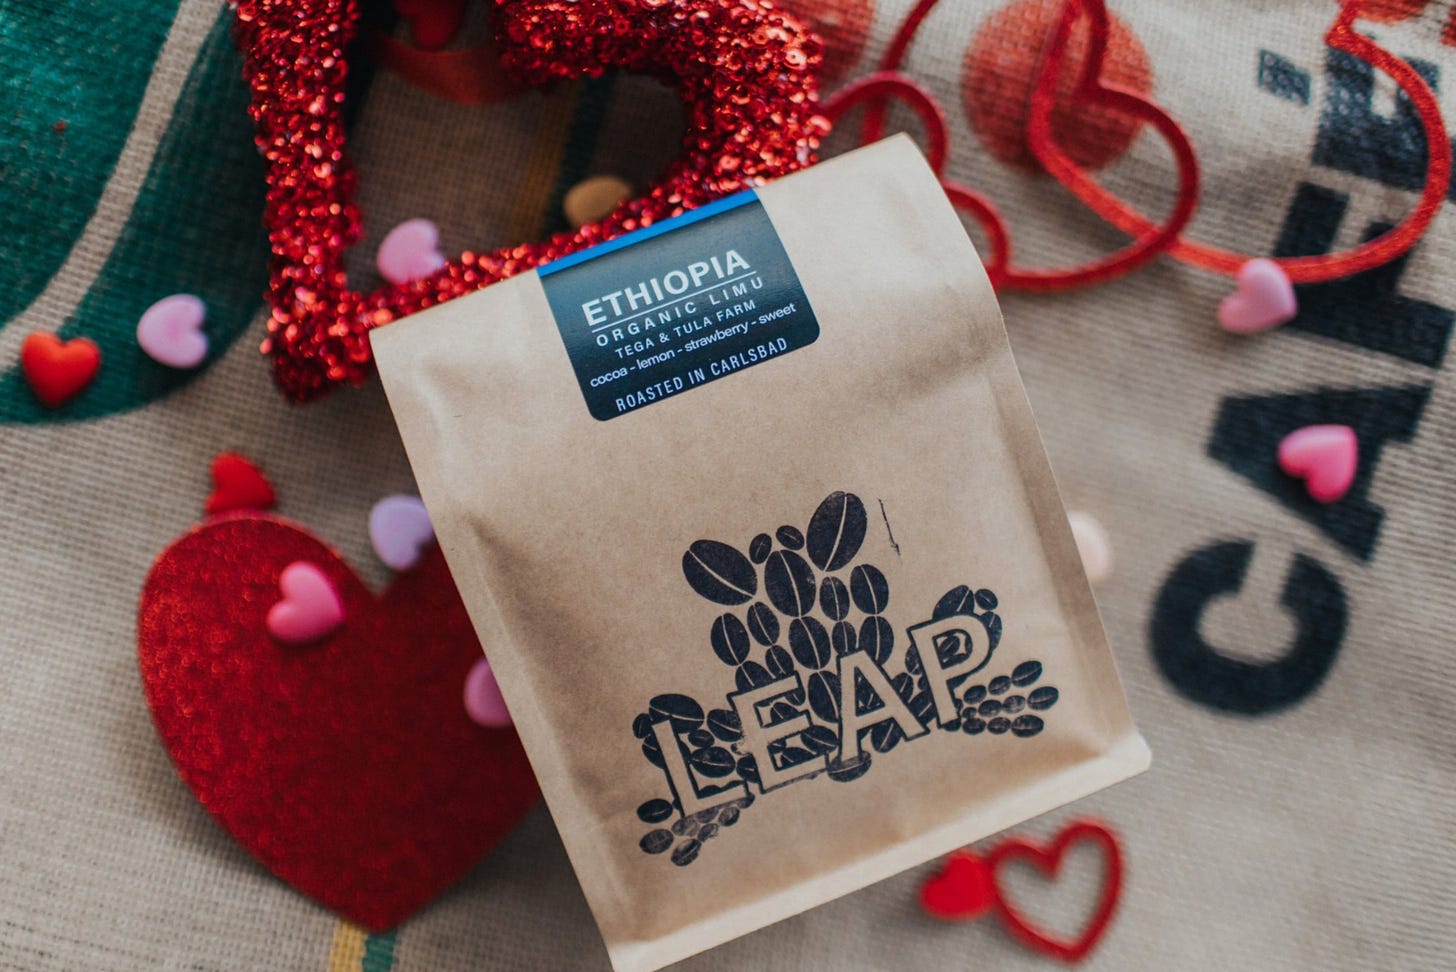 A bag of Leap Coffee Ethiopia beans, a brown bag with the Leap Coffee logo in black ink, resting on a burlap coffee sack surrounded by Valentines day hearts in red and heart candies spread around.